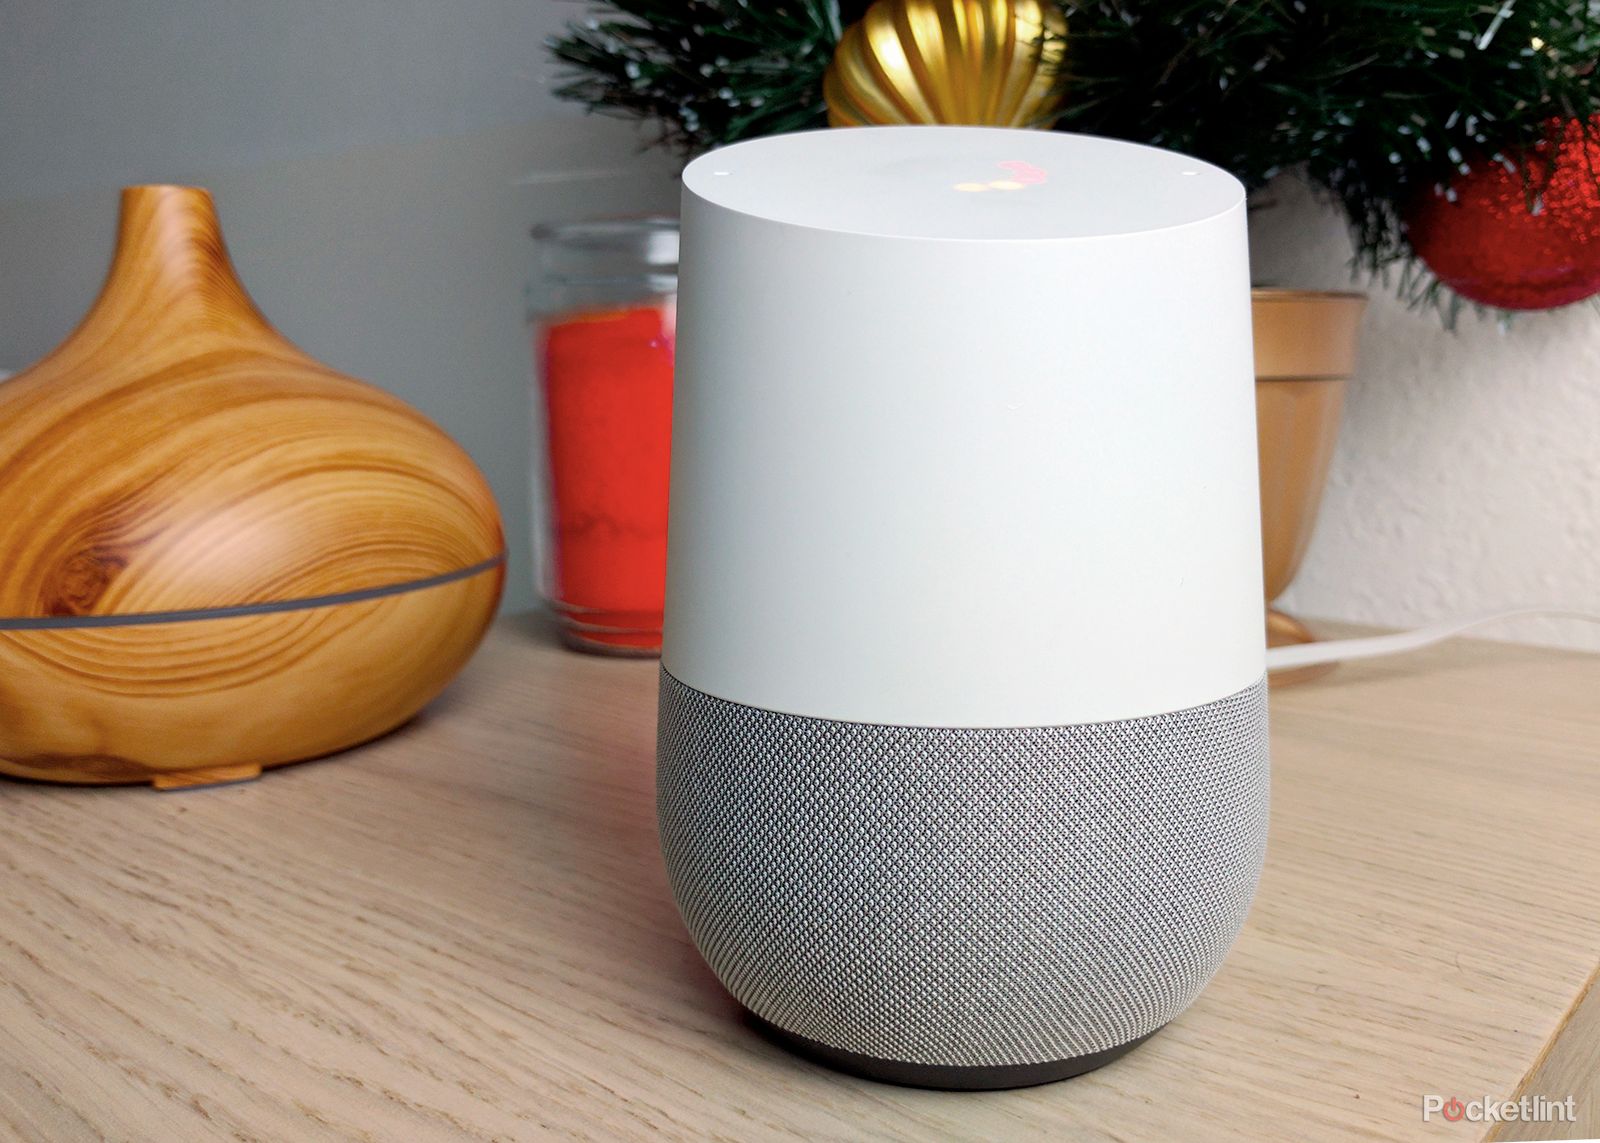 google home express shopping how to find and buy items using just your voice image 1